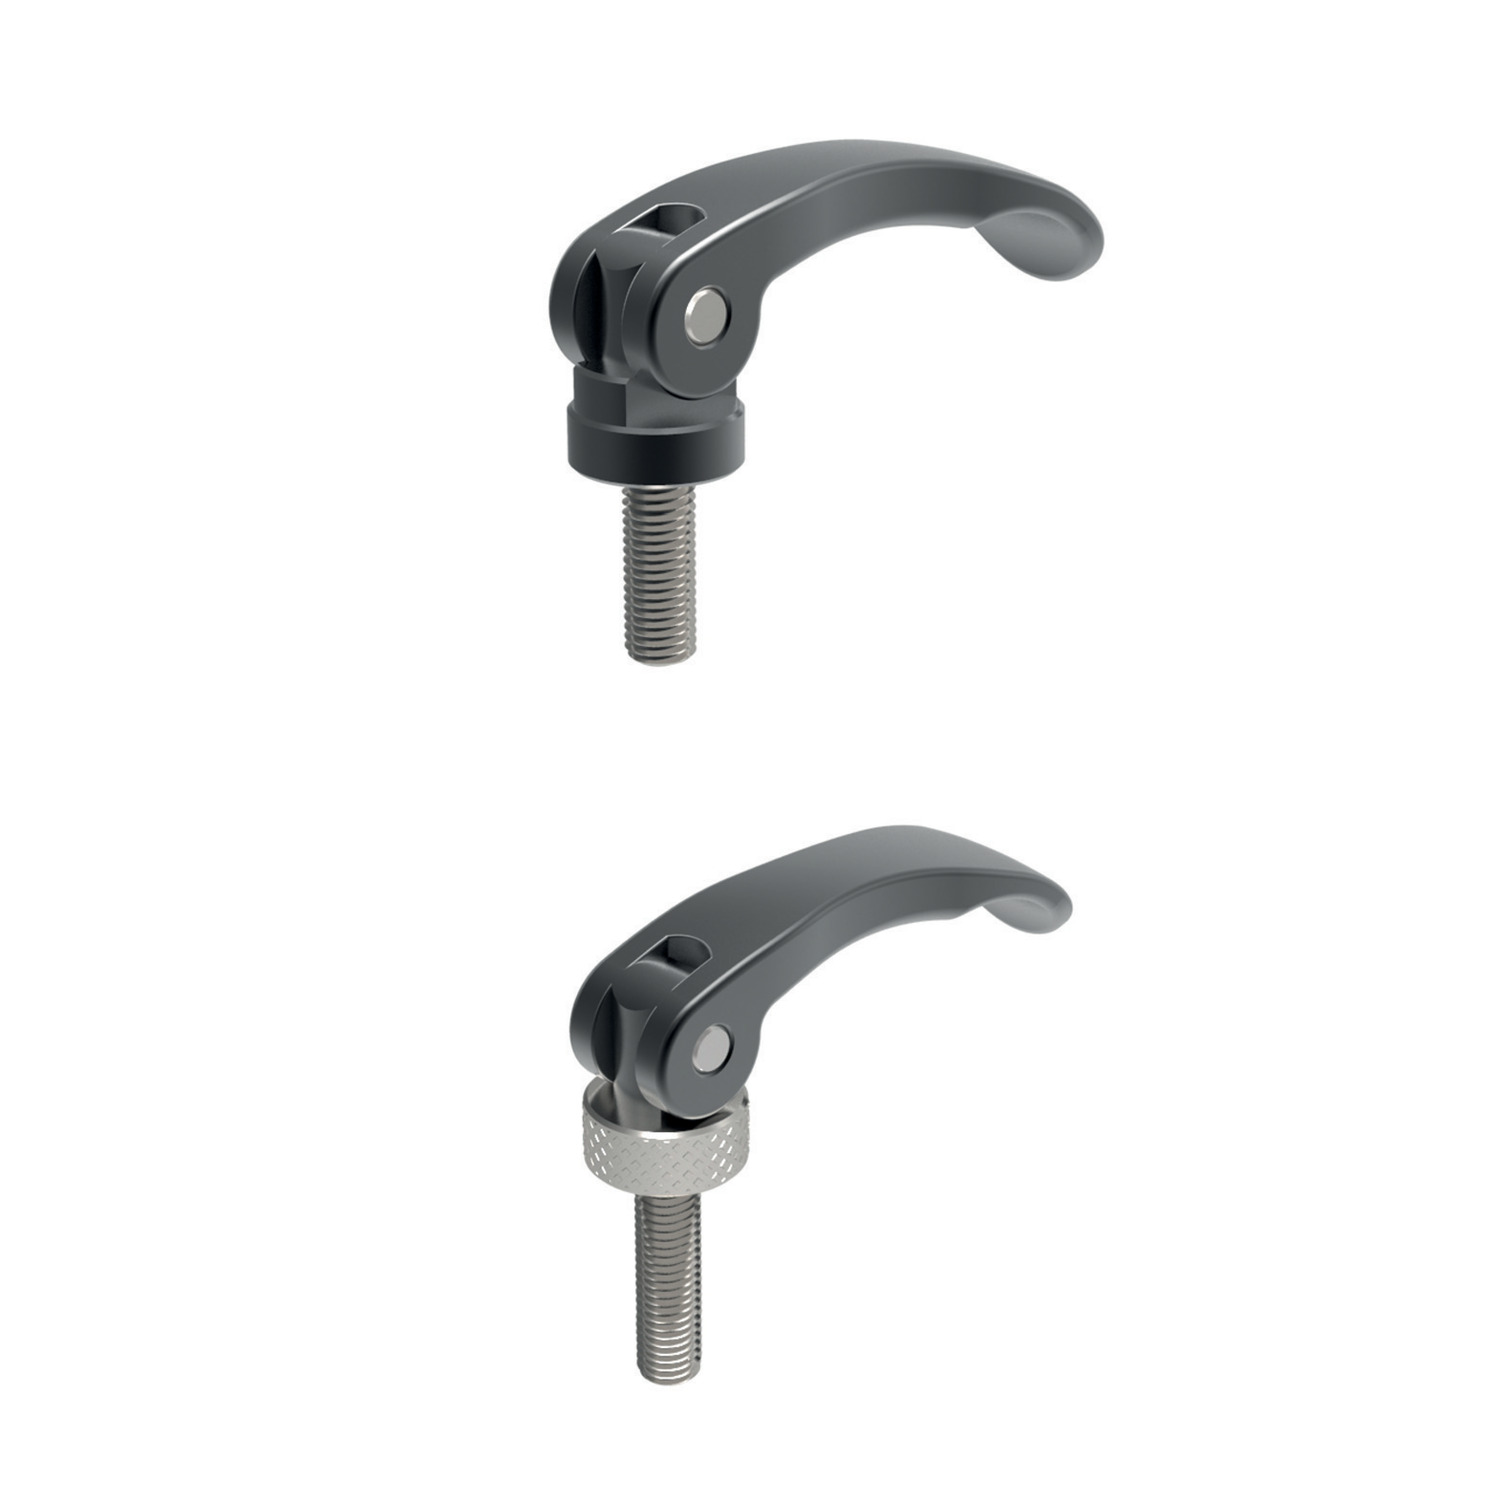 Product 18582.2, Eccentric Levers - Male adjustable / 